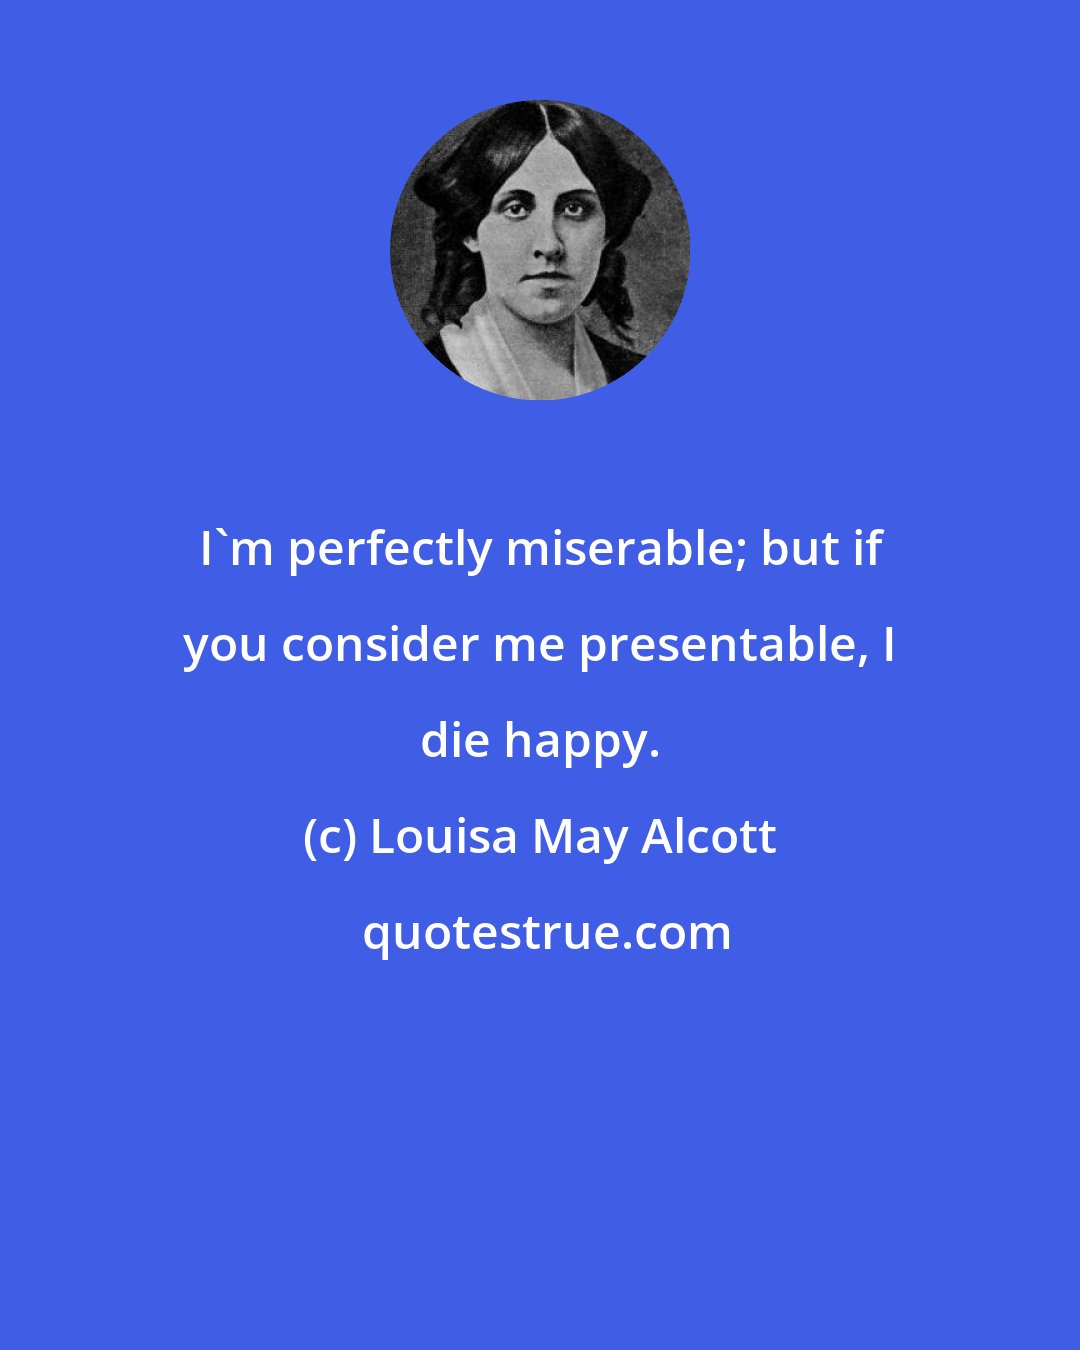 Louisa May Alcott: I'm perfectly miserable; but if you consider me presentable, I die happy.